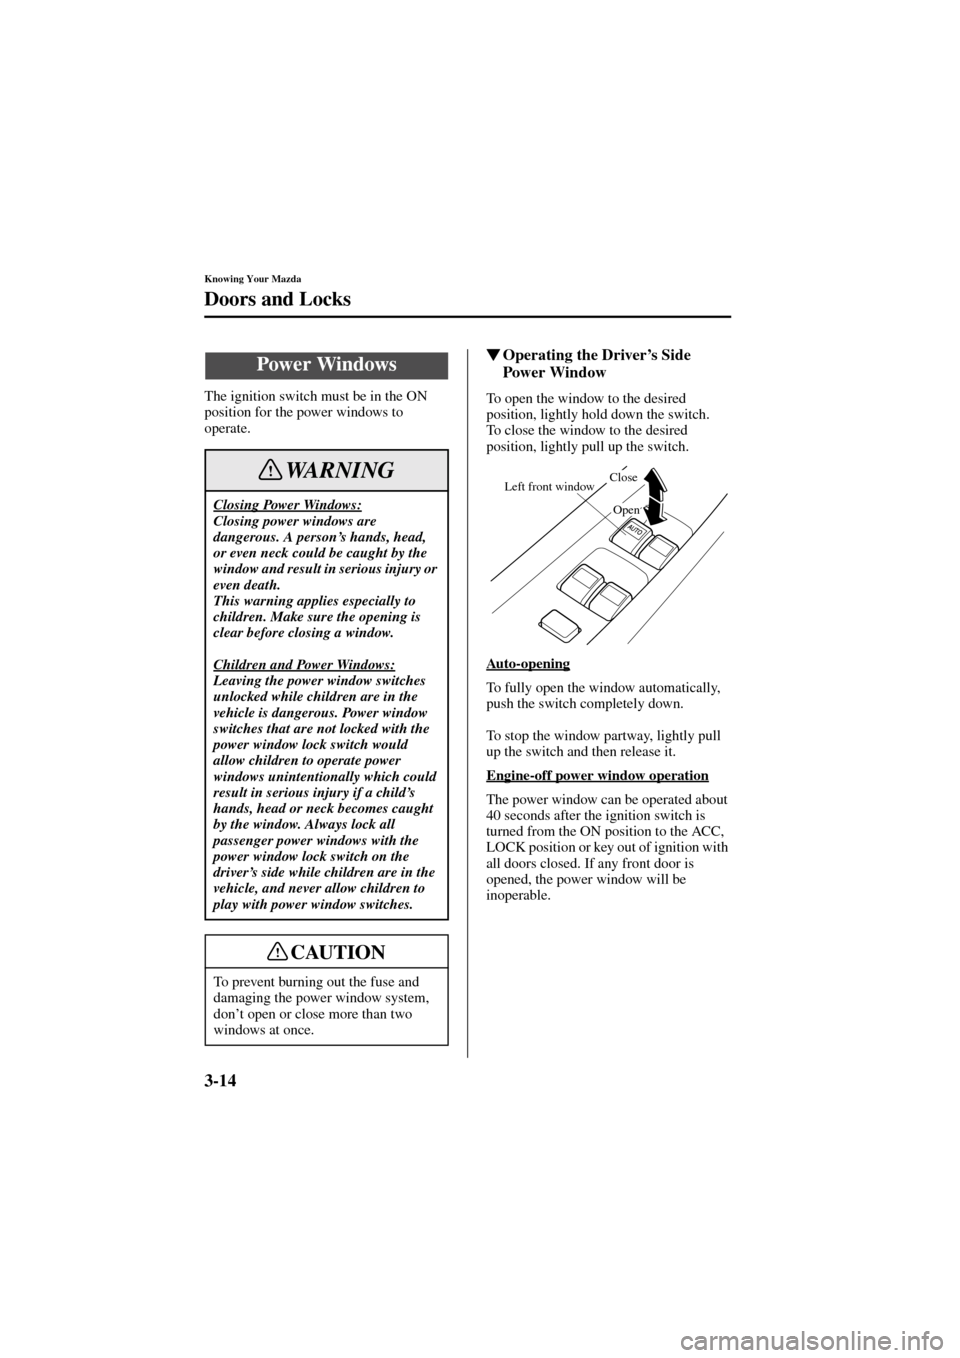 MAZDA MODEL 6 2004   (in English) Service Manual 3-14
Knowing Your Mazda
Doors and Locks
Form No. 8R29-EA-02I
The ignition switch must be in the ON 
position for the power windows to 
operate.
Operating the Driver’s Side 
Power Window
To open the